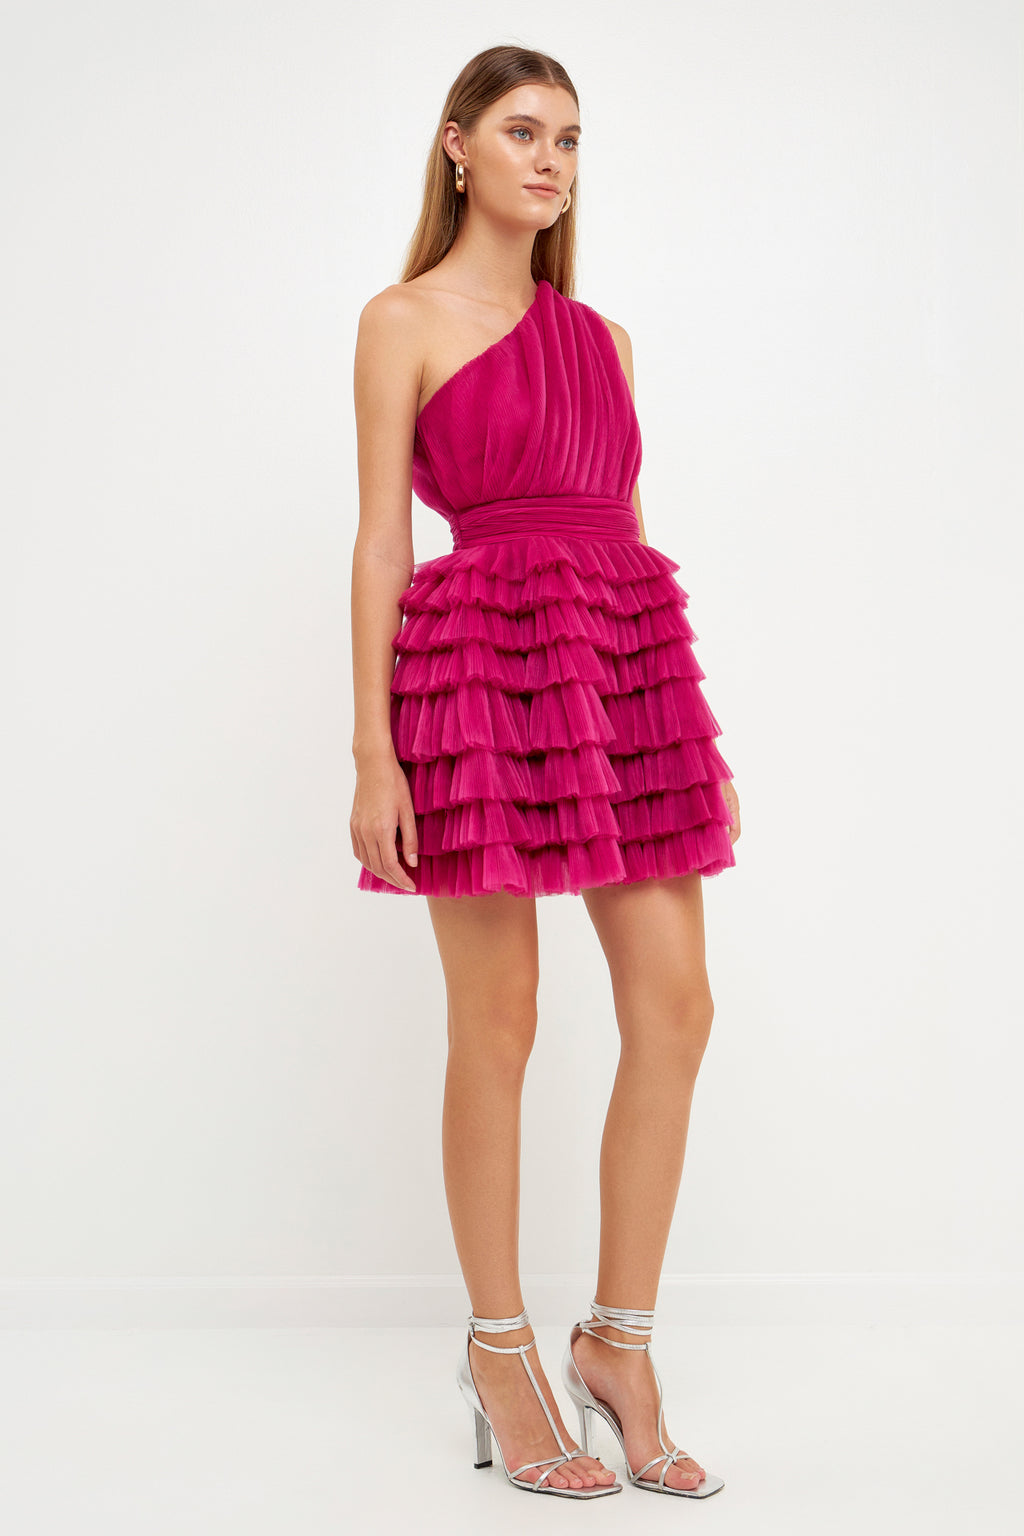 Endless Rose - Tiered Tulle Mini Dress Cherry / M